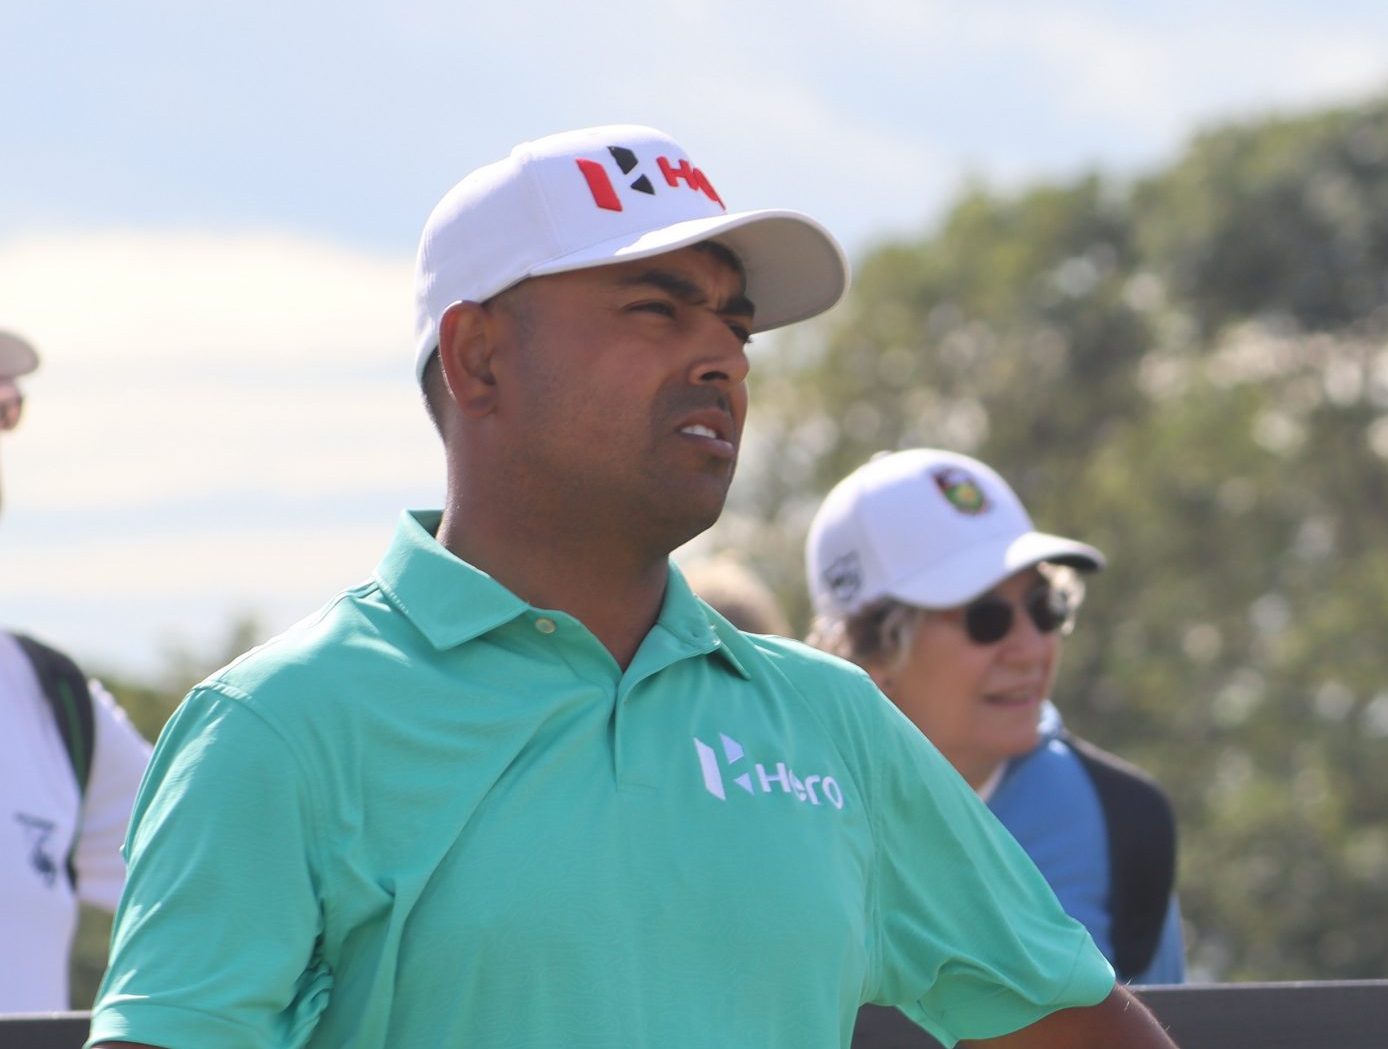 Lahiri signs off Tied 51st as Poston wins wire to wire at John Deere